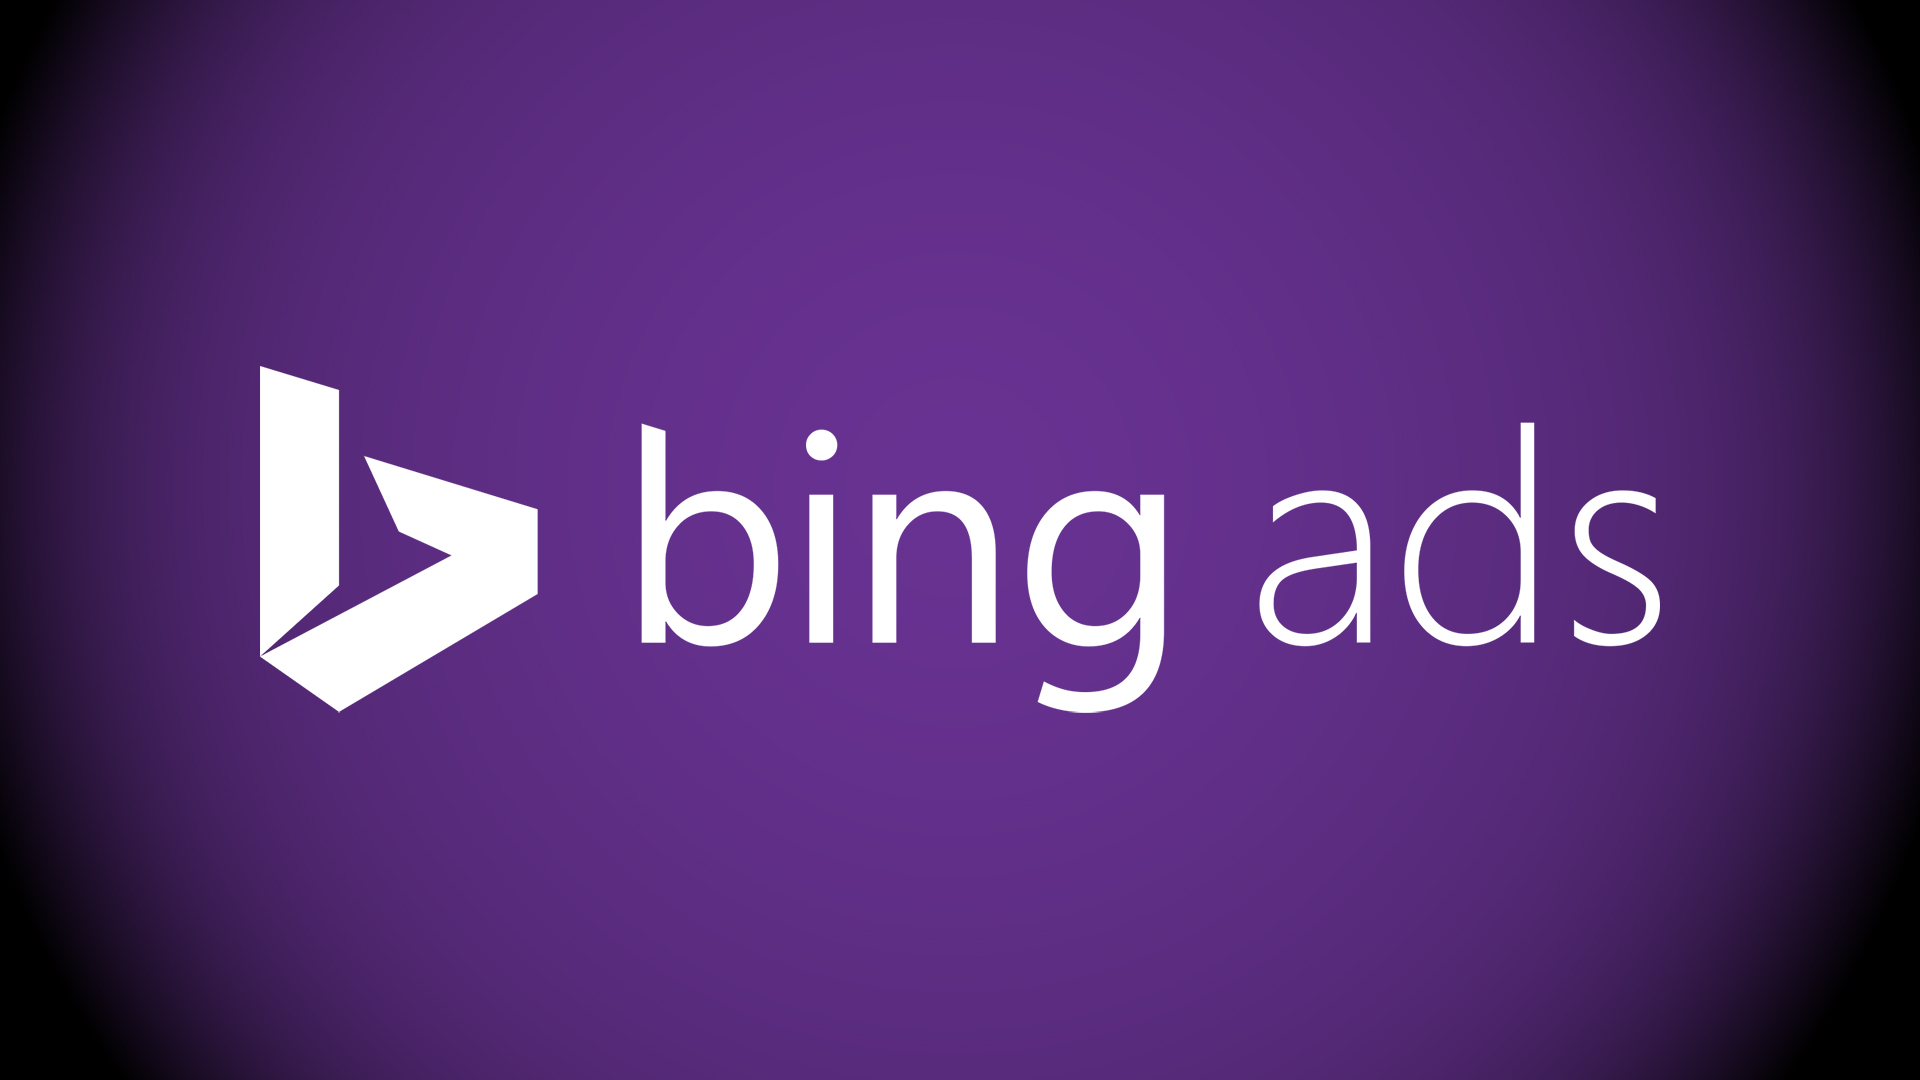 The Bing Ads logo on a purple background